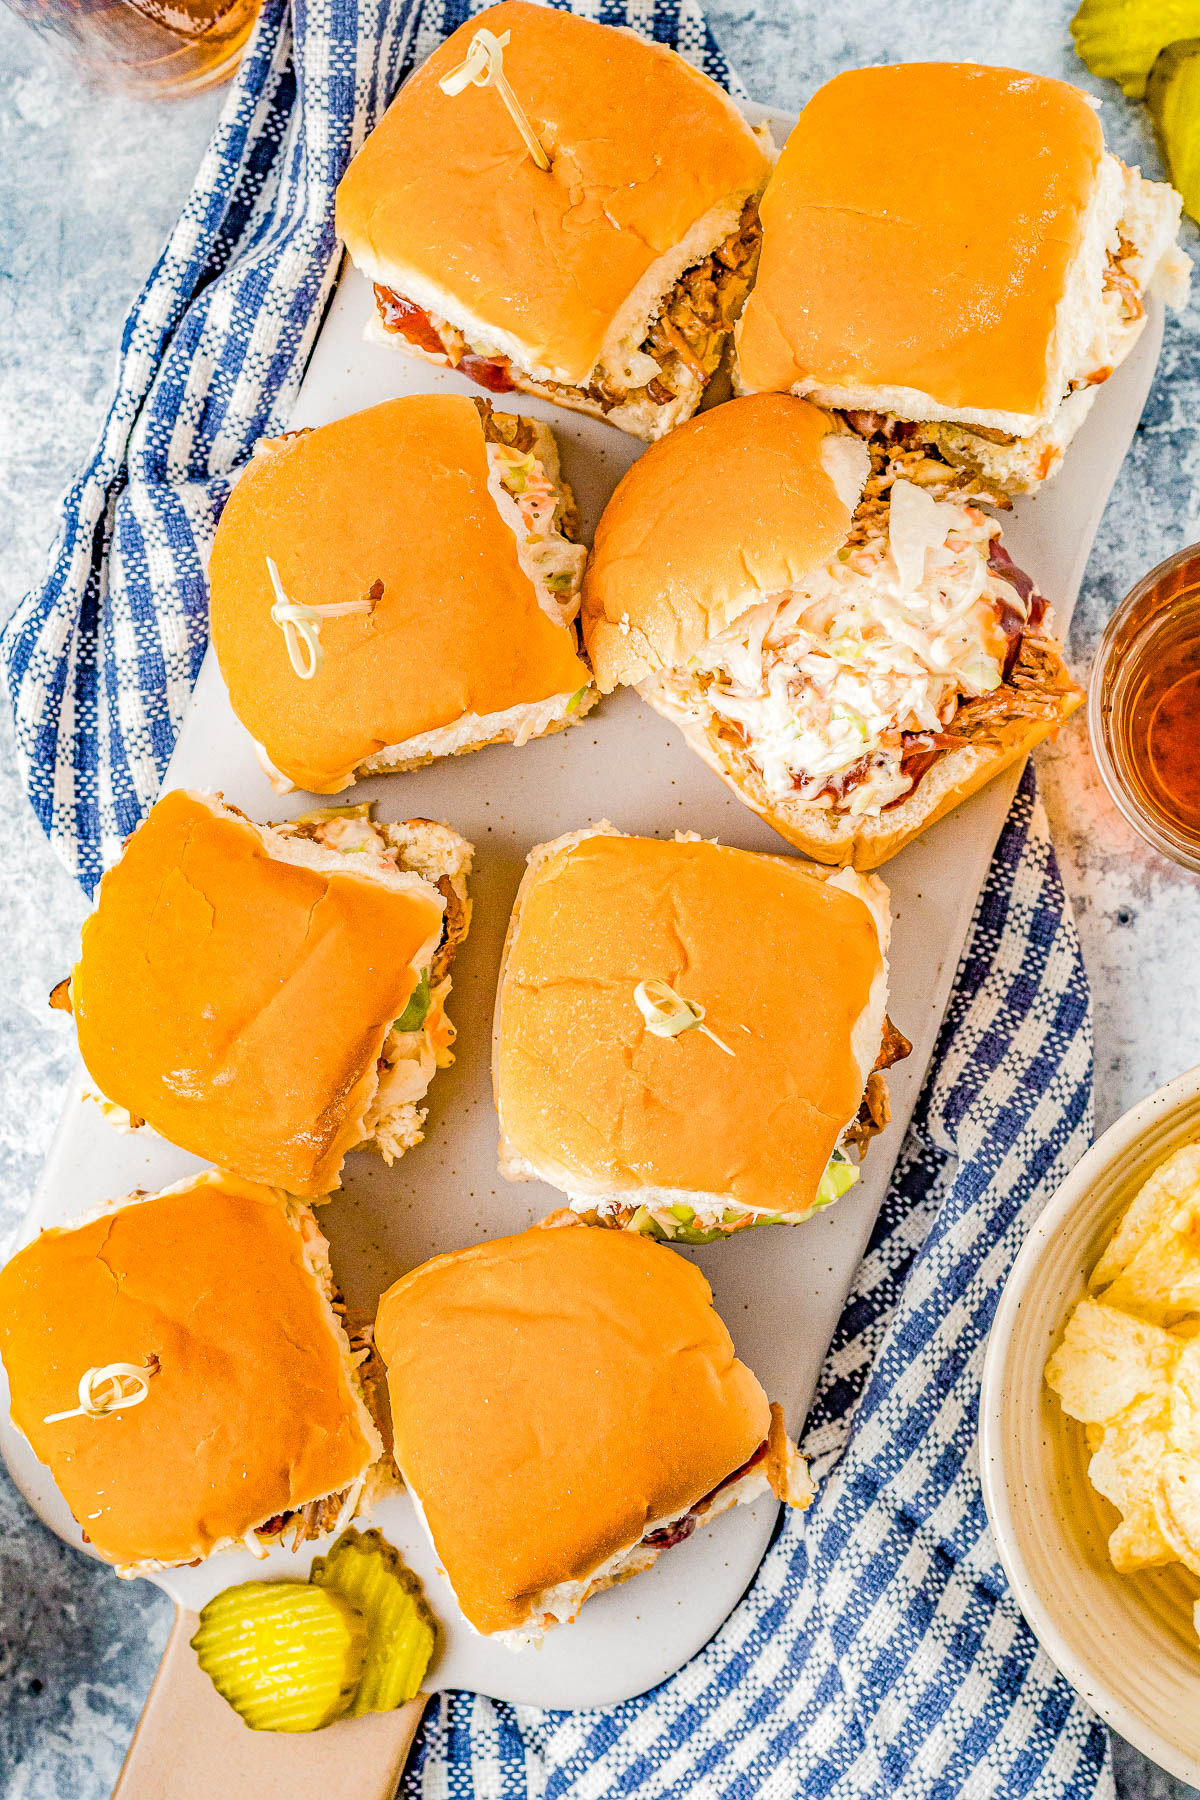 Easy Pulled Pork Sliders - Moist and tender pulled pork, topped with barbecue sauce and coleslaw, and sandwiched between soft Hawaiian rolls! Everyone LOVES these EASY juicy sliders that are finger lickin' good! PERFECT for game days, casual entertaining, backyard barbecues, graduation and Father's Day celebrations.